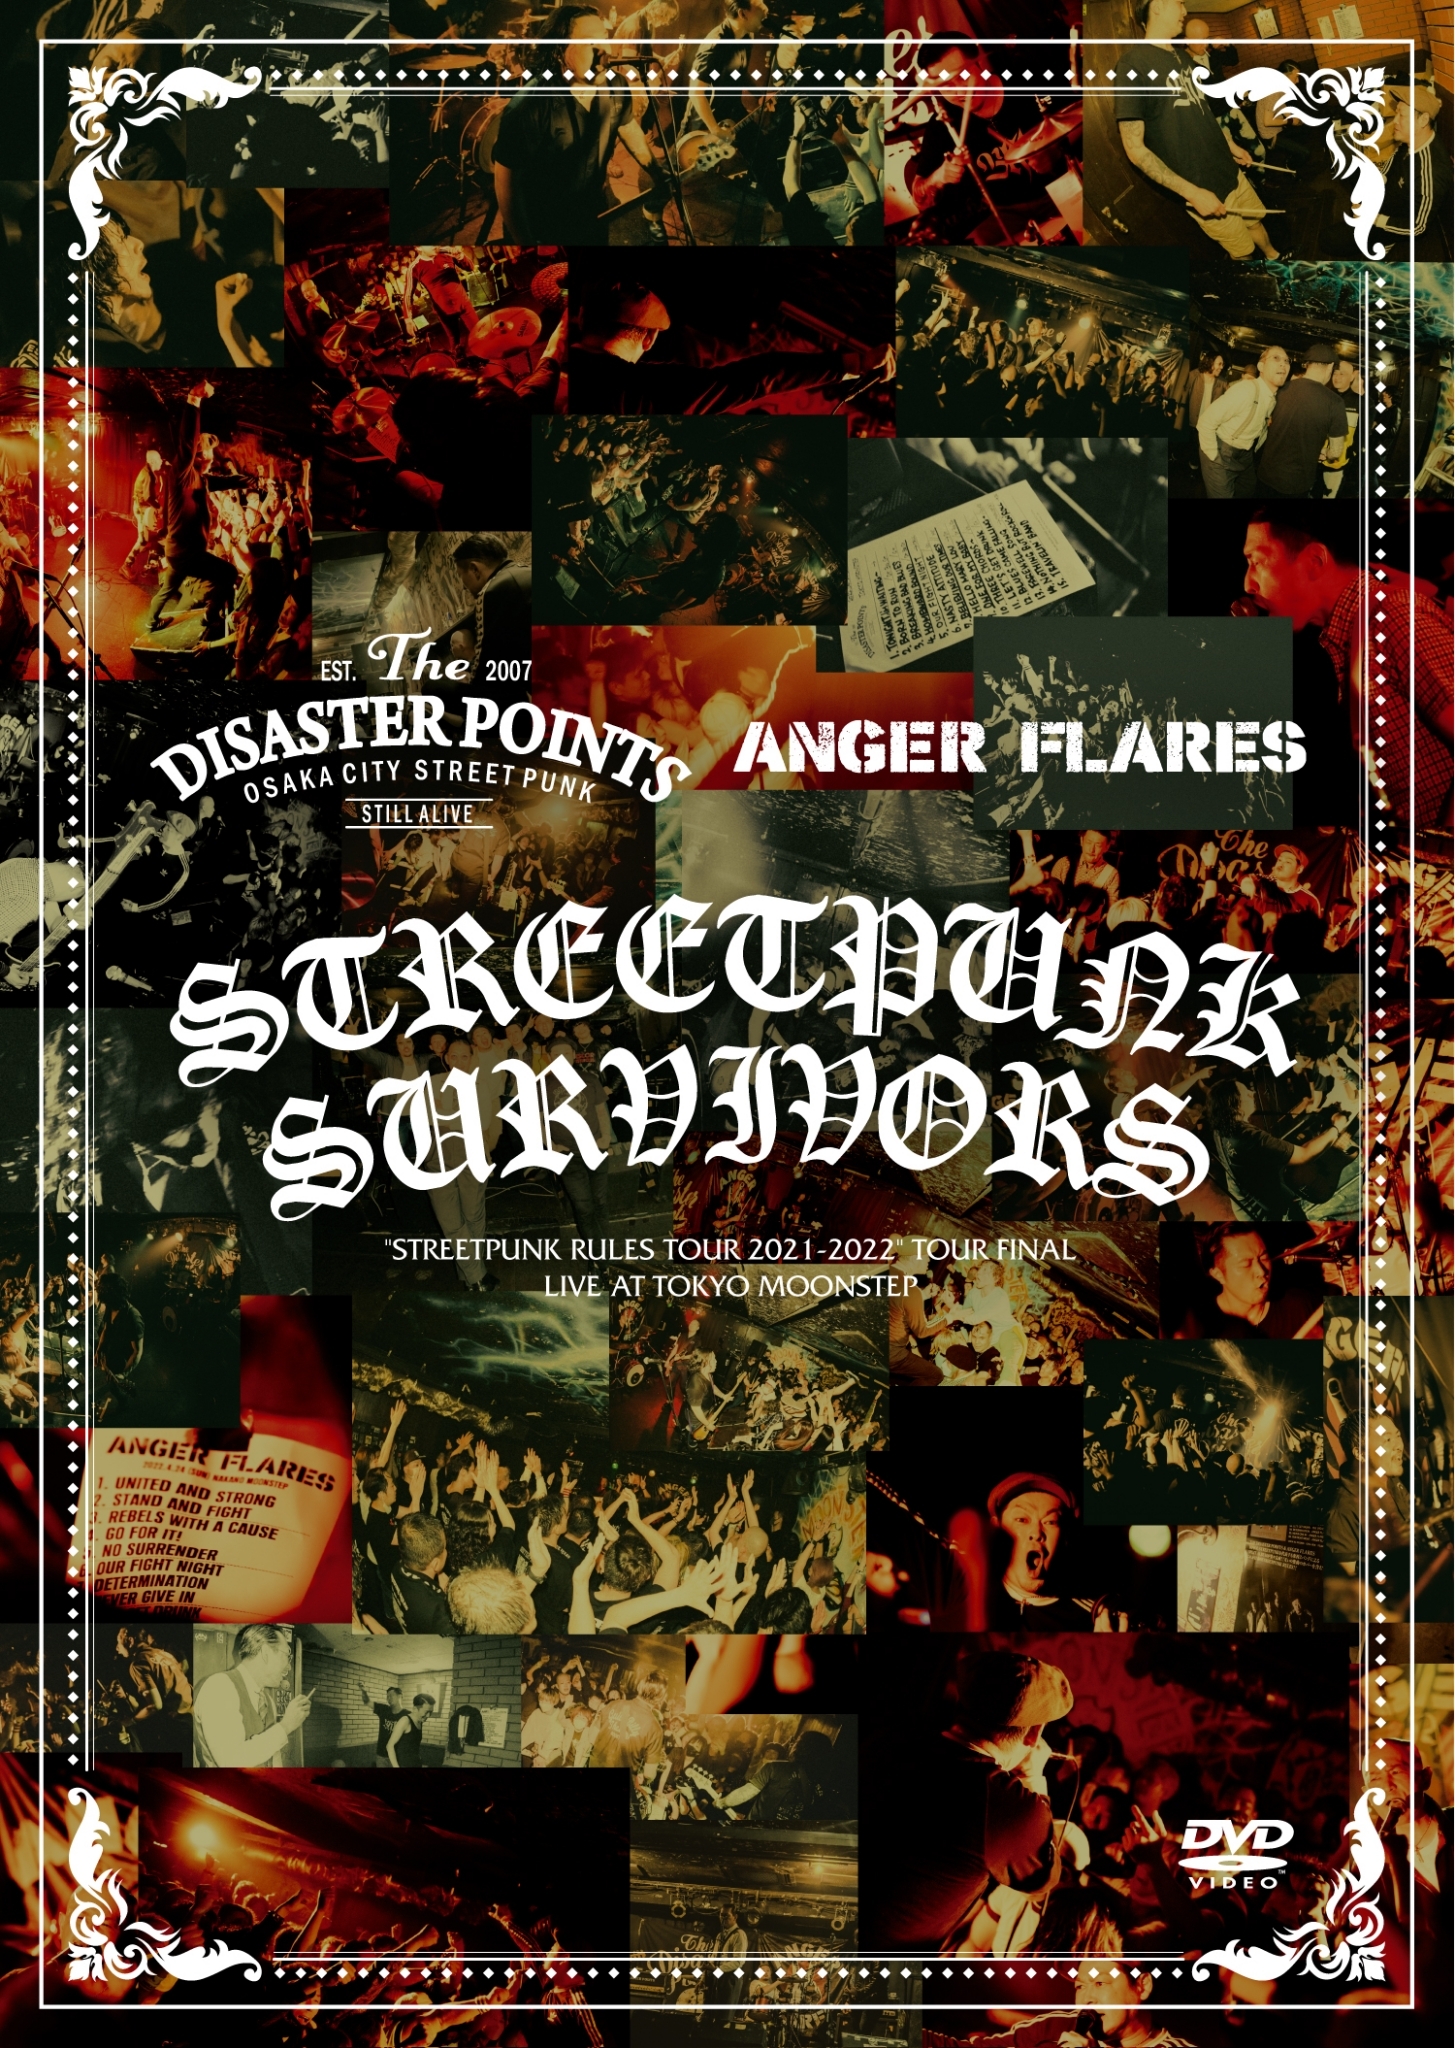 THE DISASTER POINTS / ANGER FLARES「STREETPUNK SURVIVORS」DVD発売決定